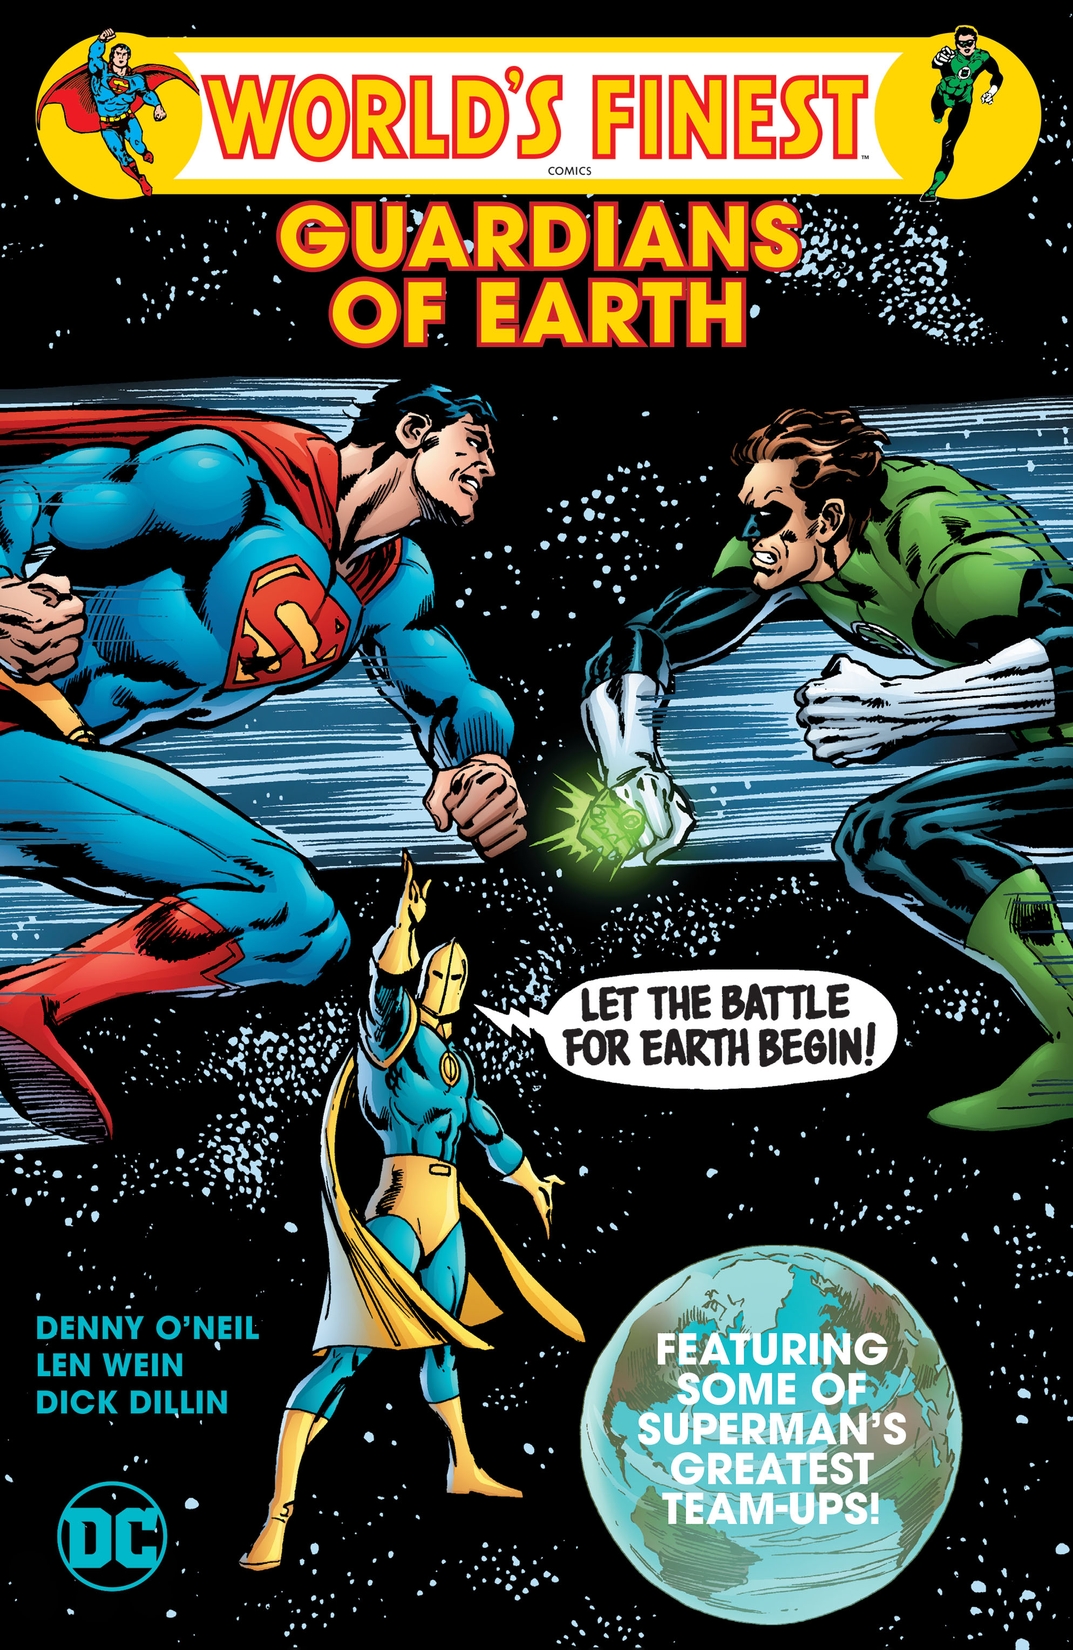 World's Finest: Guardians of Earth preview images